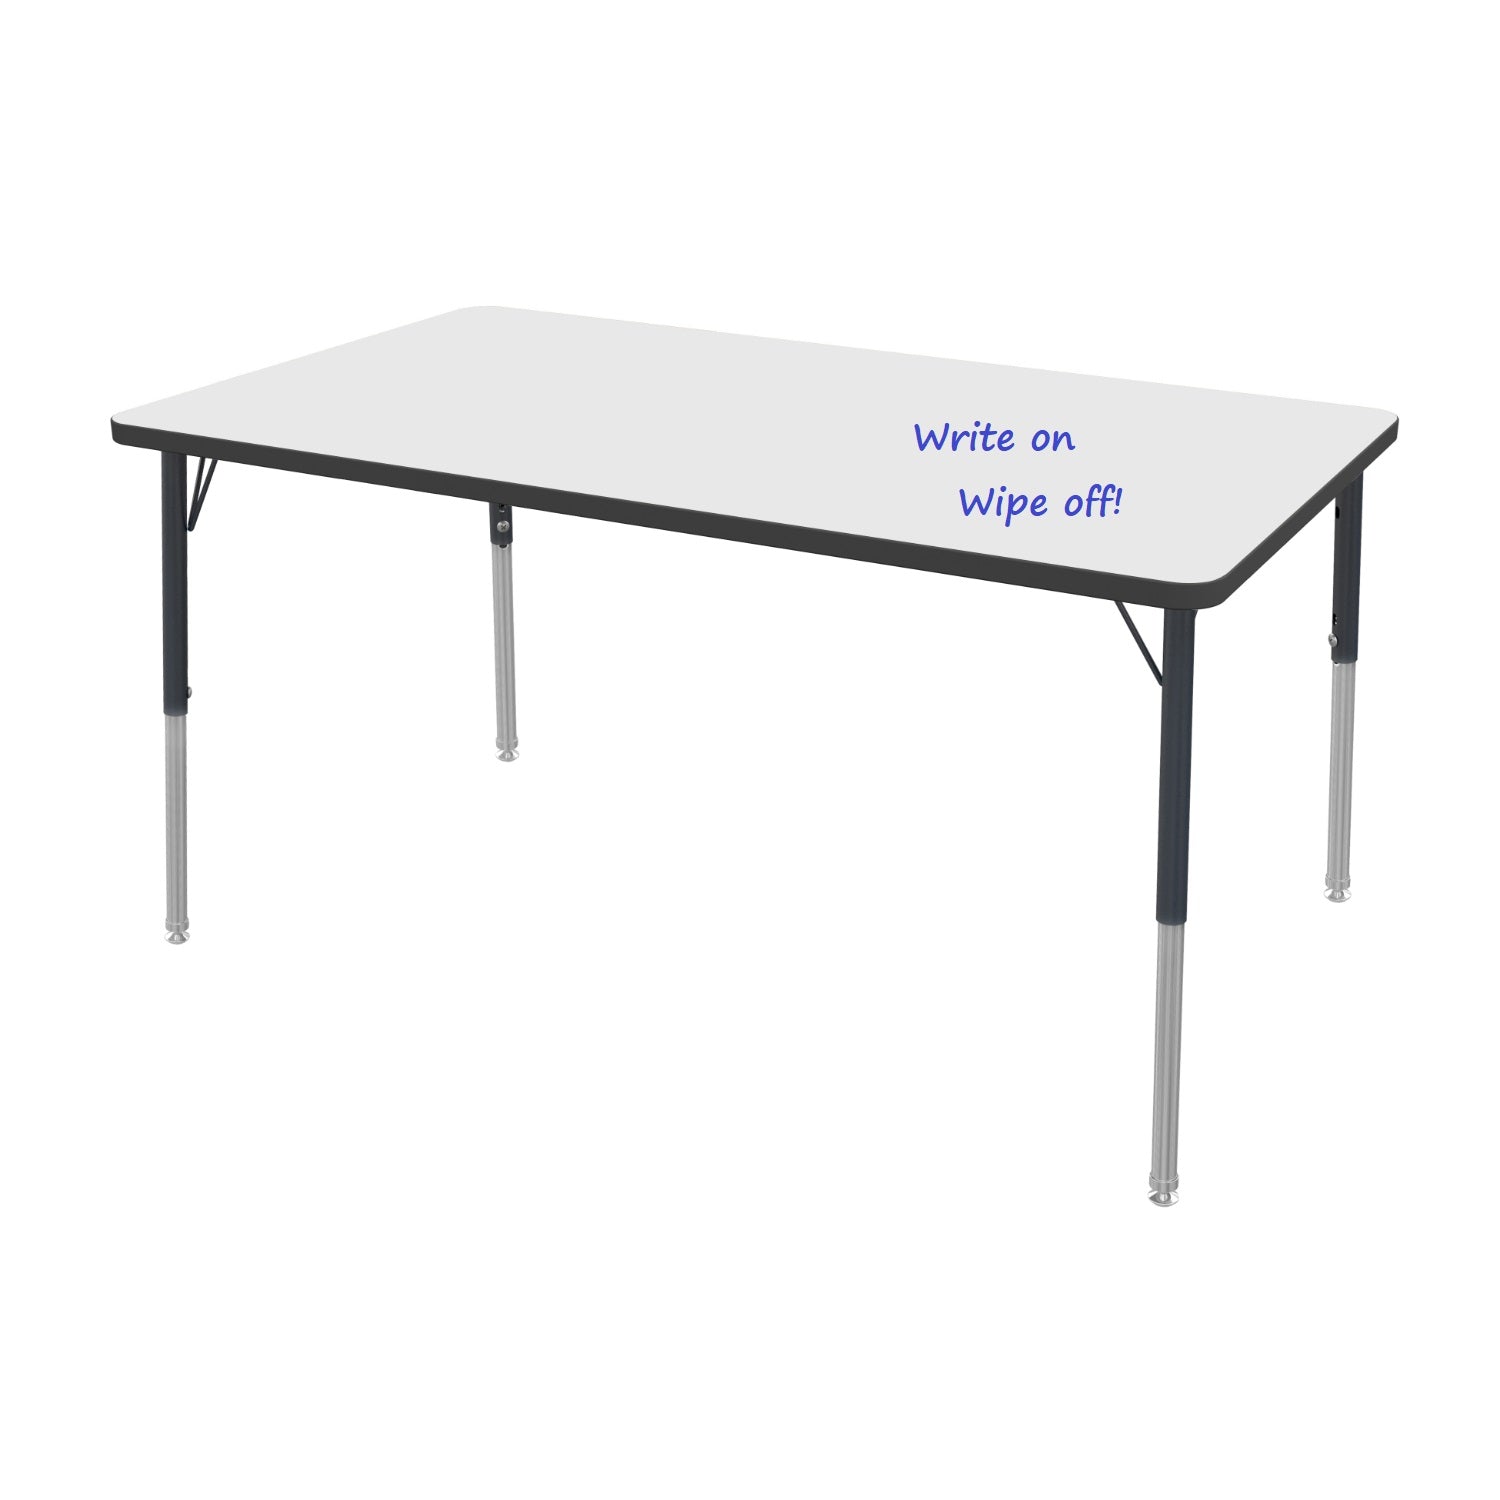 MG Series Adjustable Height Activity Table with White Dry Erase Markerboard Top, 36" x 72" Rectangle